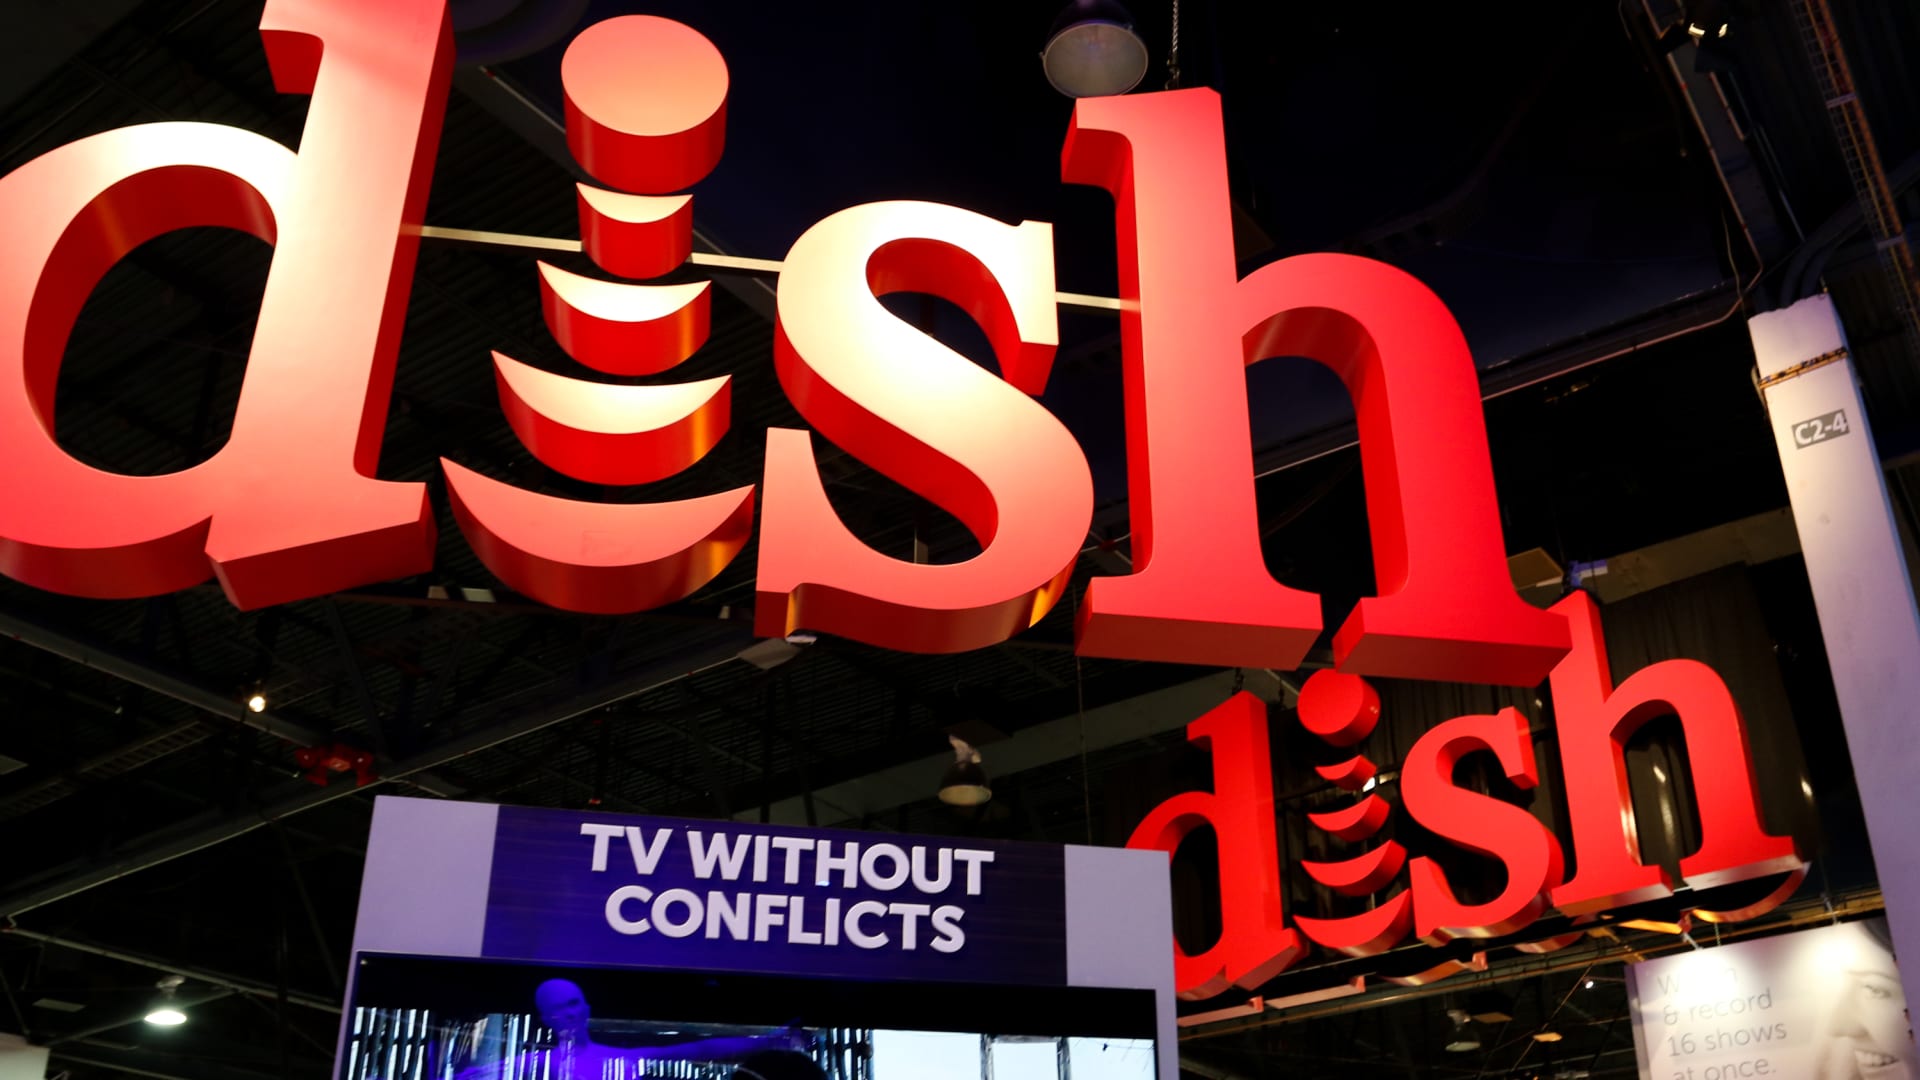 Dish Network confirms network outage was a cybersecurity breach